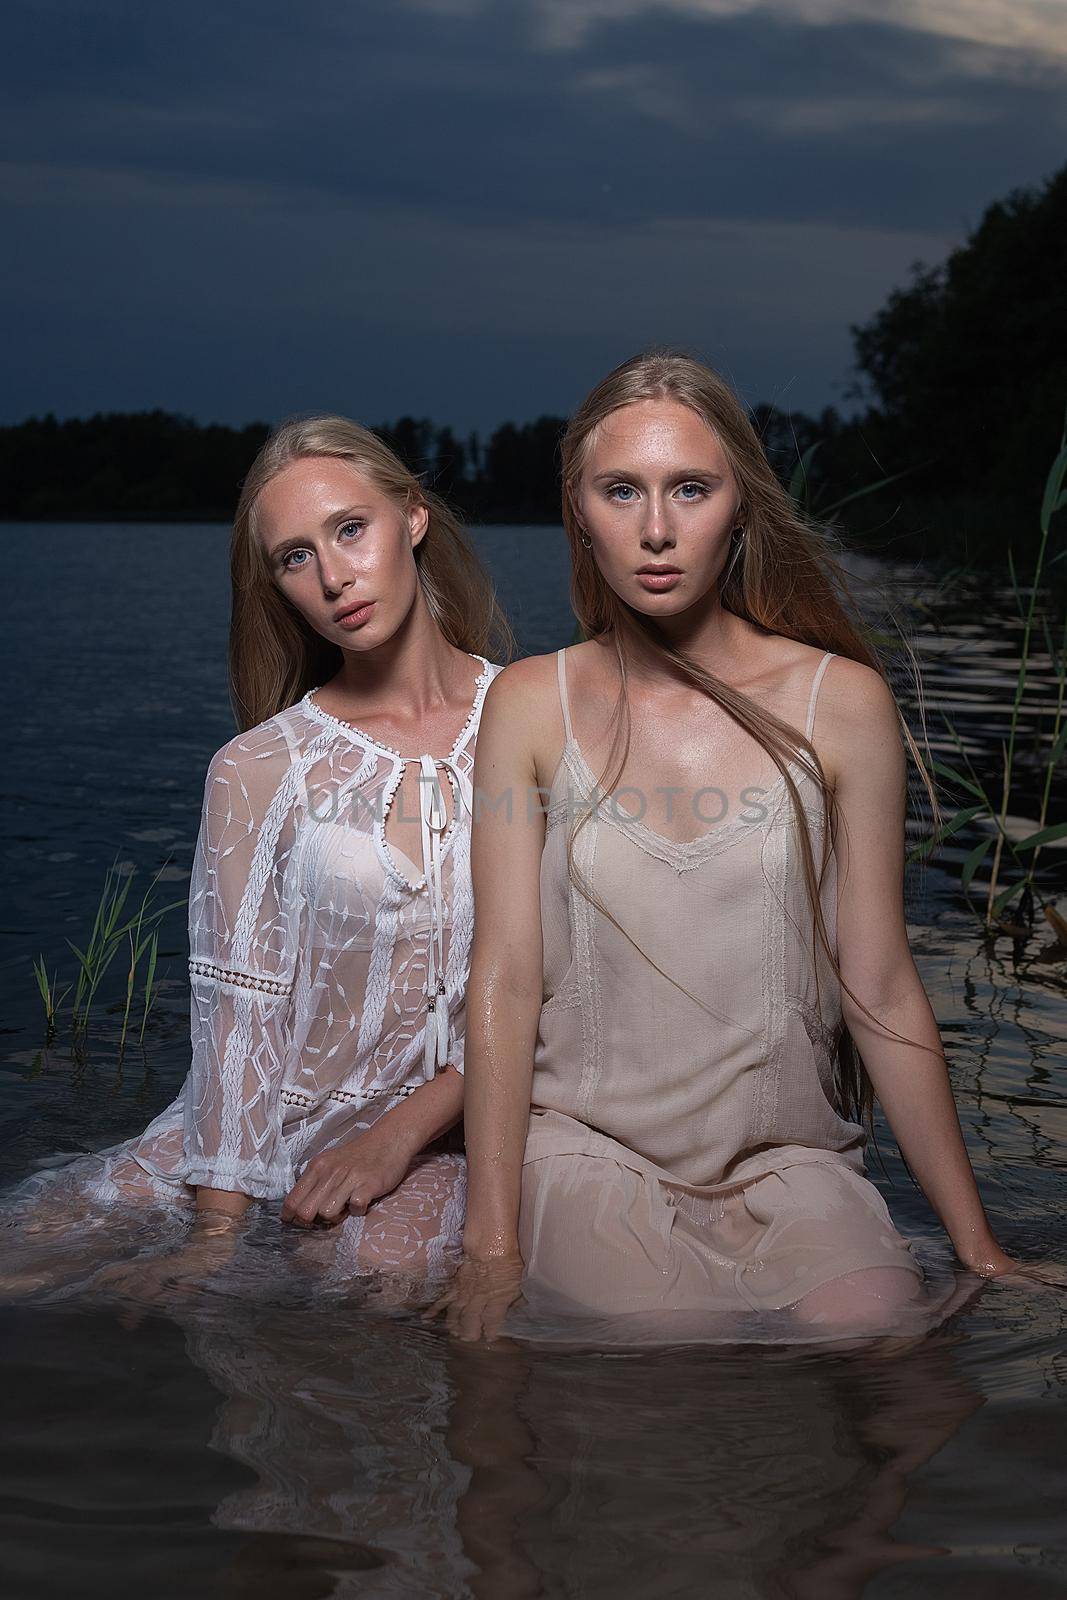 two young twin sisters with long blond hair posing in light dresses in water of lake at summer night, looking at camera. stylish fashion photoshoot with flashlight. outdoors evening photosession